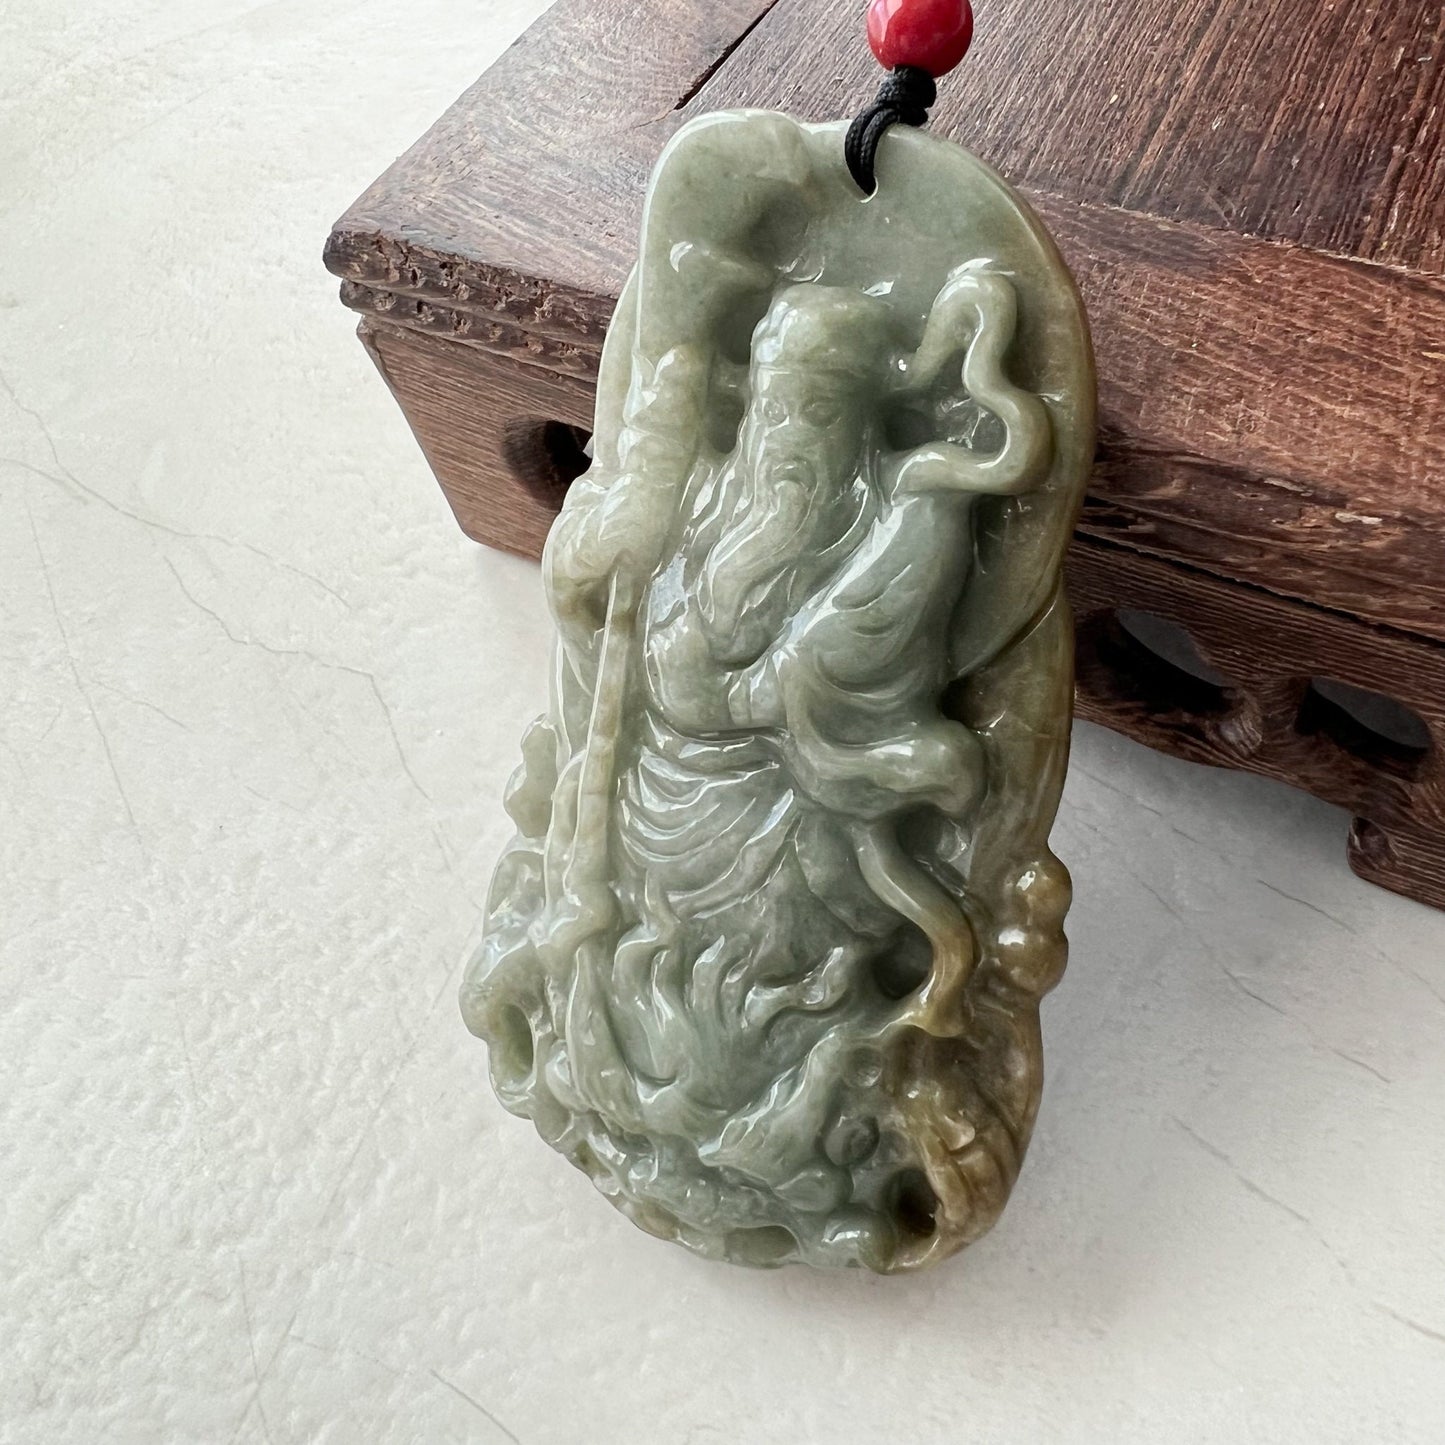 Guan Yu Guan Gong, Yellow and Green Jadeite Jade, God of Wealth and War, Hand Carved Pendant Necklace, YJ-1221-0134809 - AriaDesignCollection